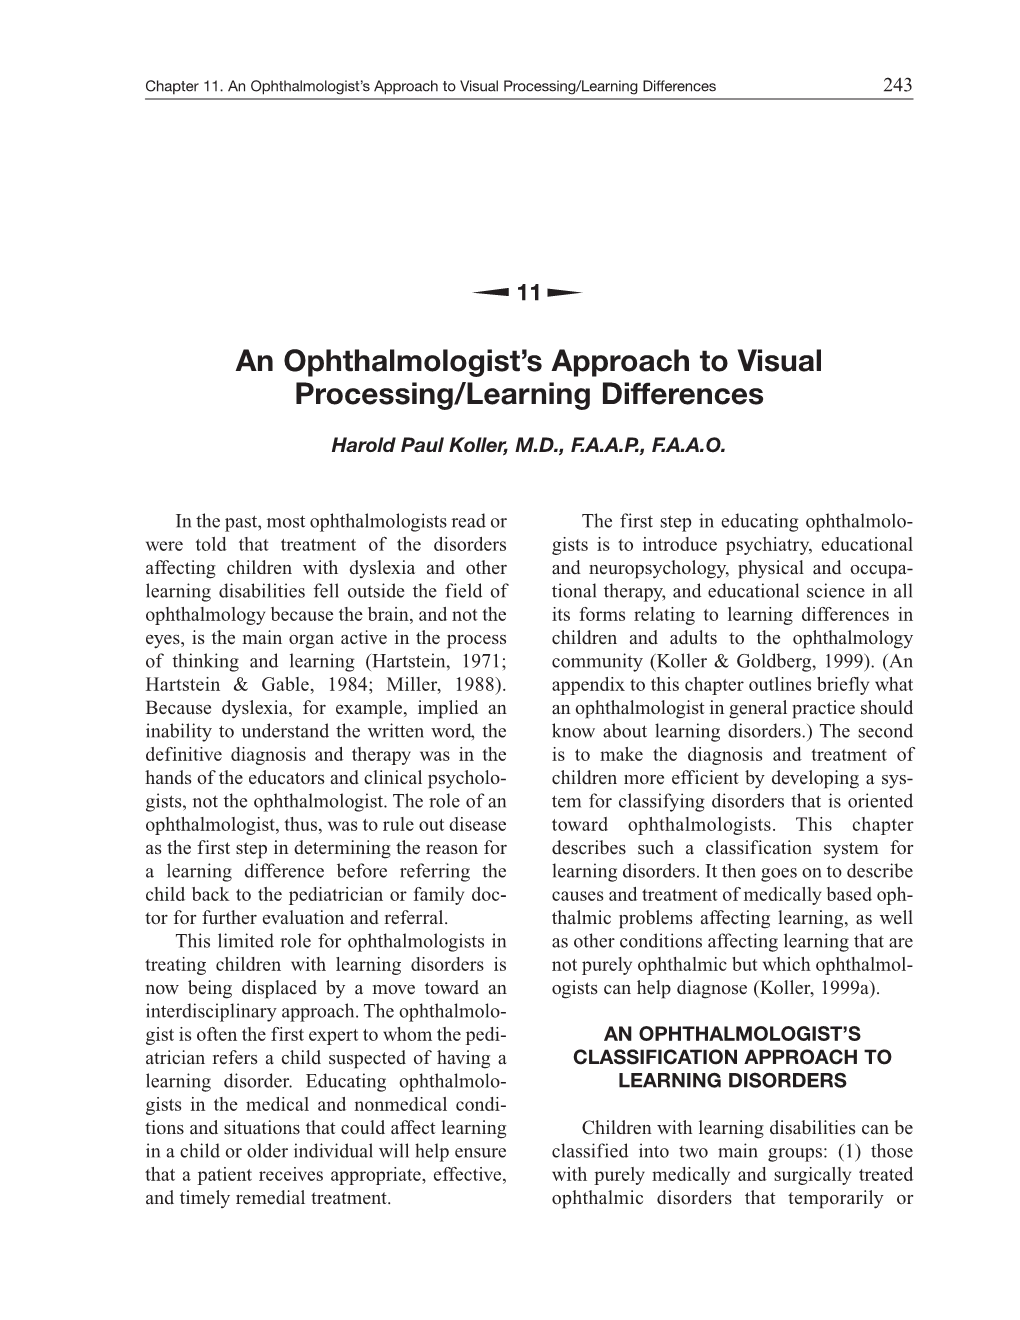 An Ophthalmologist's Approach to Visual Processing/Learning